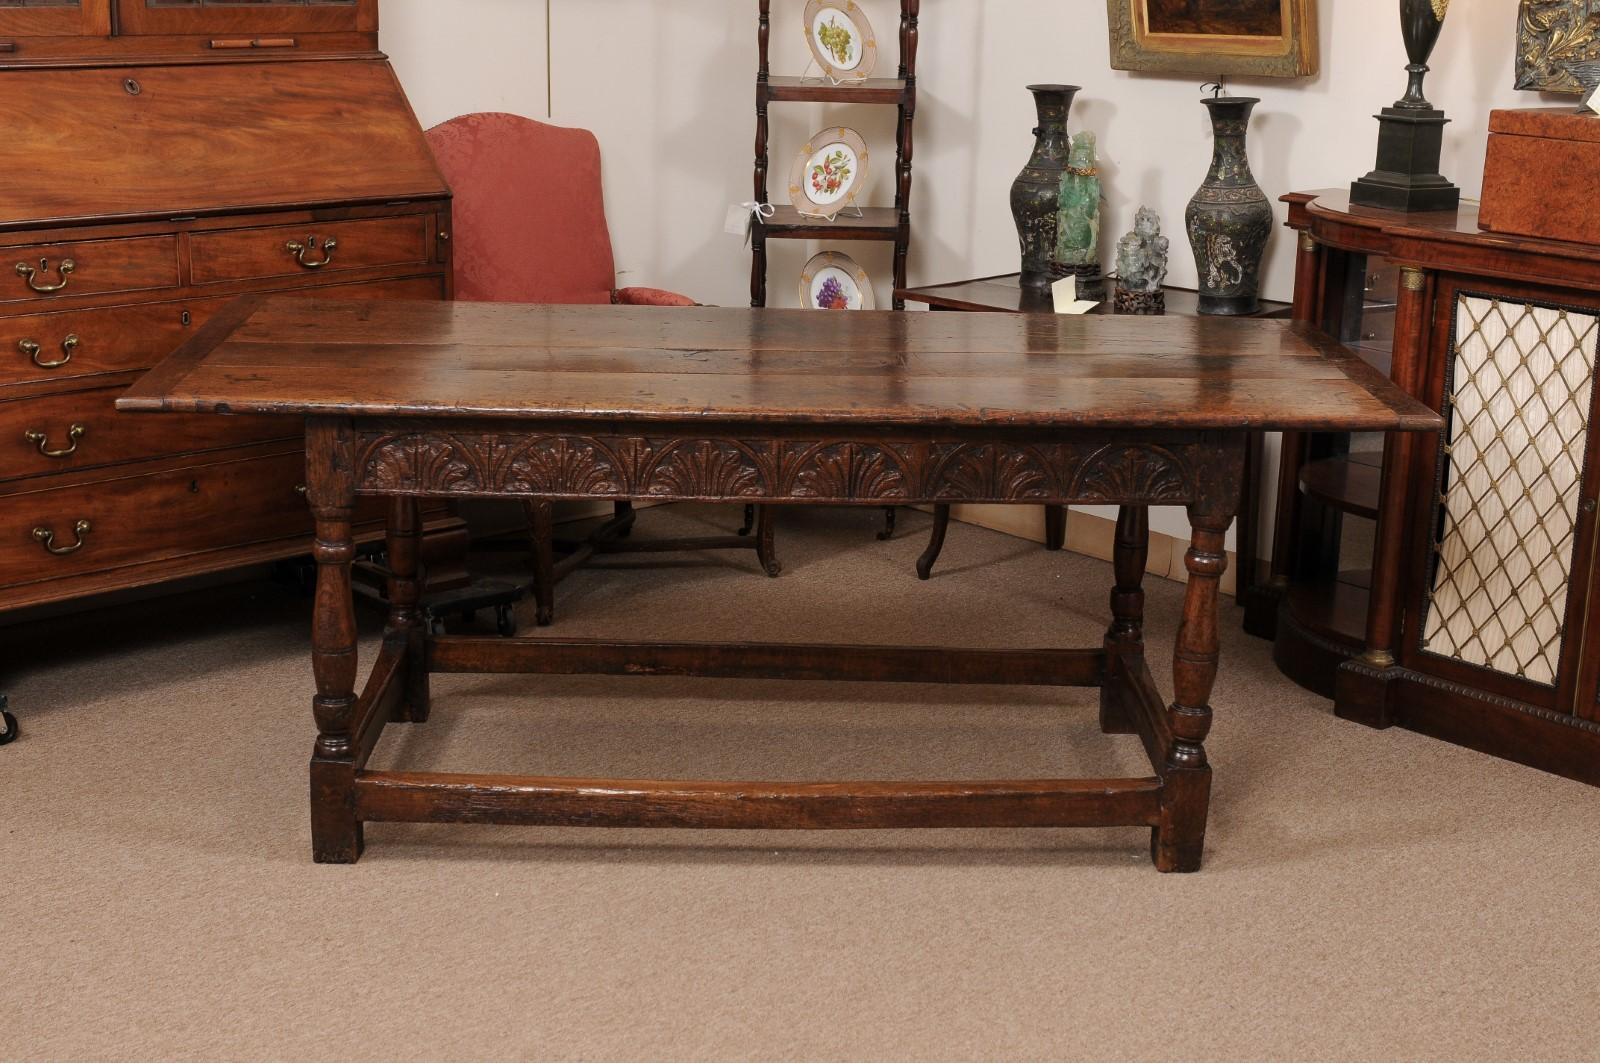  Early 18th Century English Long Oak Hall Table with Carved Frieze, Turned Legs  For Sale 3